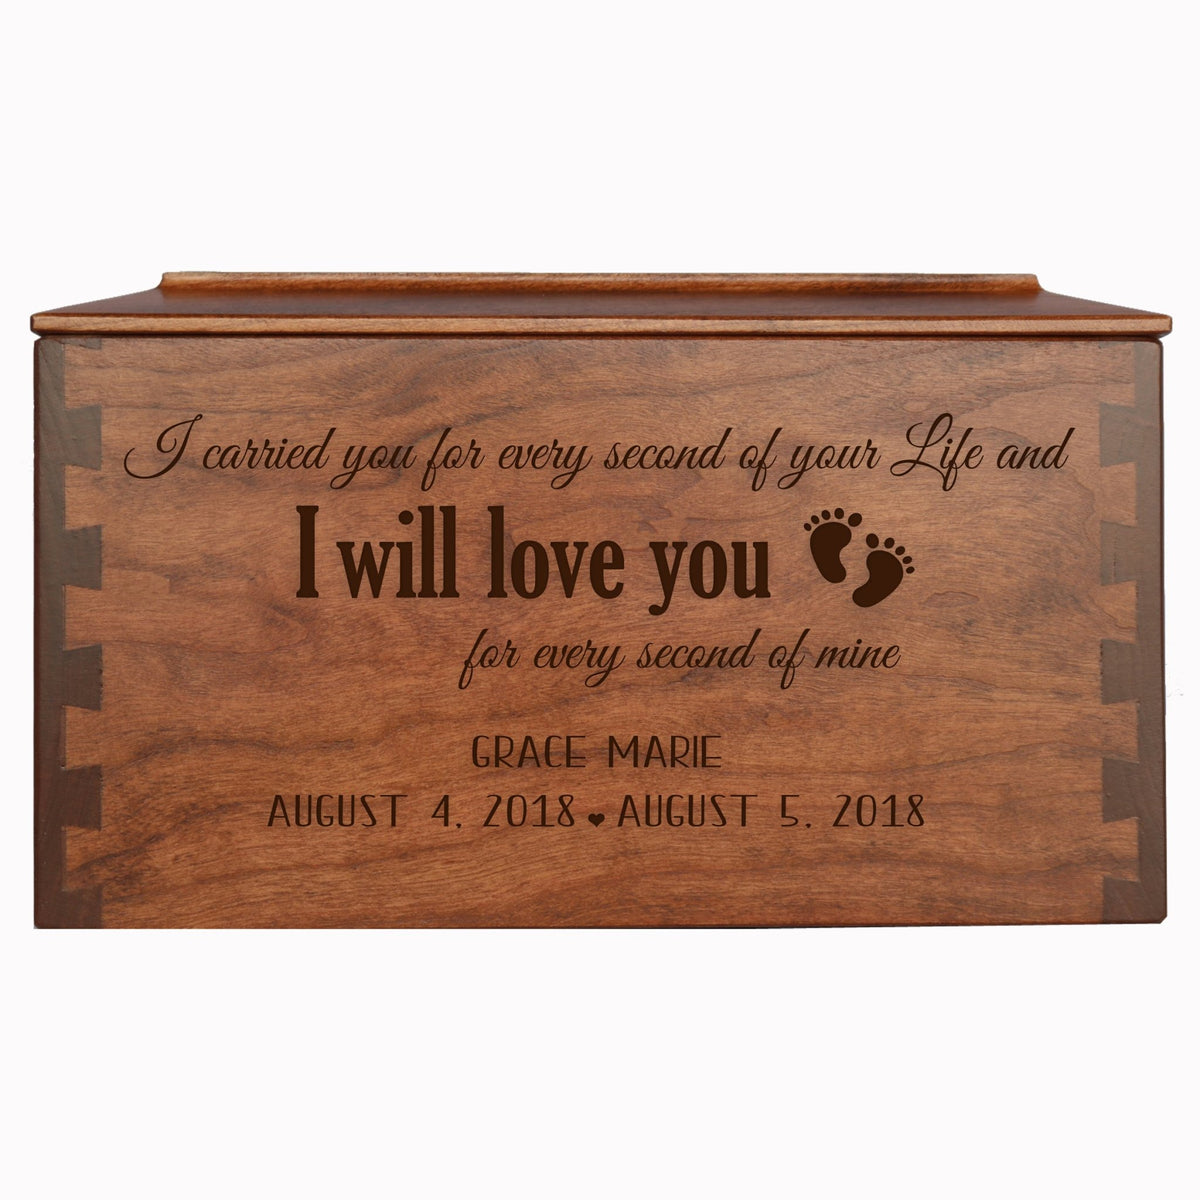 I Carried You Foot Personalized Memorial Decorative Dovetail Cremation Urn For Human Ashes Funeral and Condolence Keepsake - LifeSong Milestones